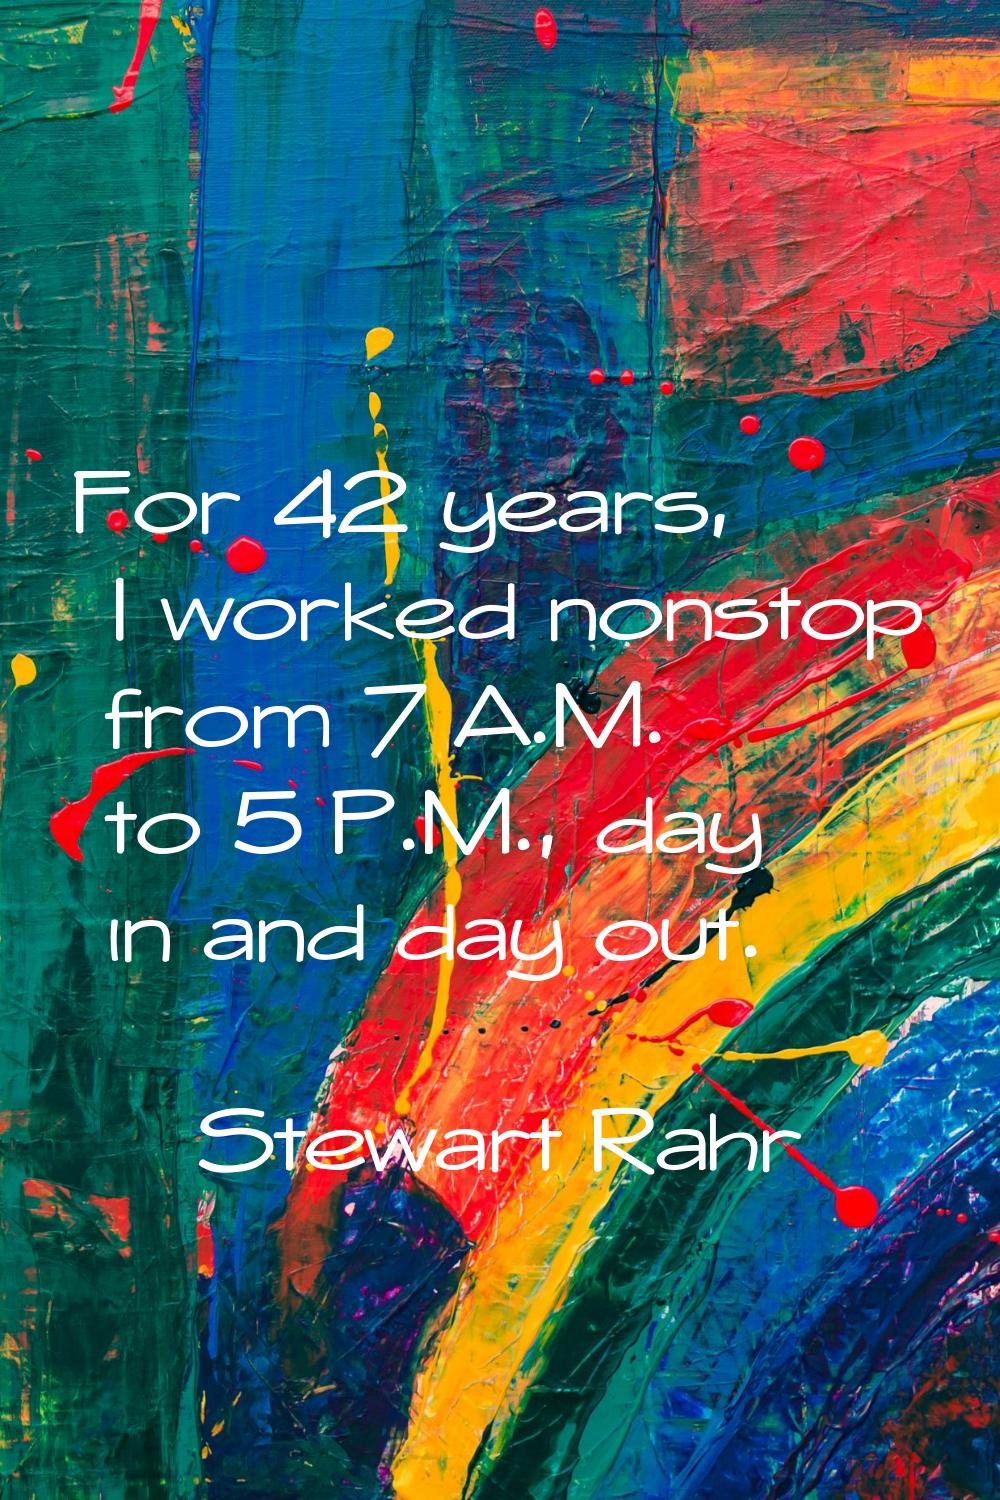 For 42 years, I worked nonstop from 7 A.M. to 5 P.M., day in and day out.